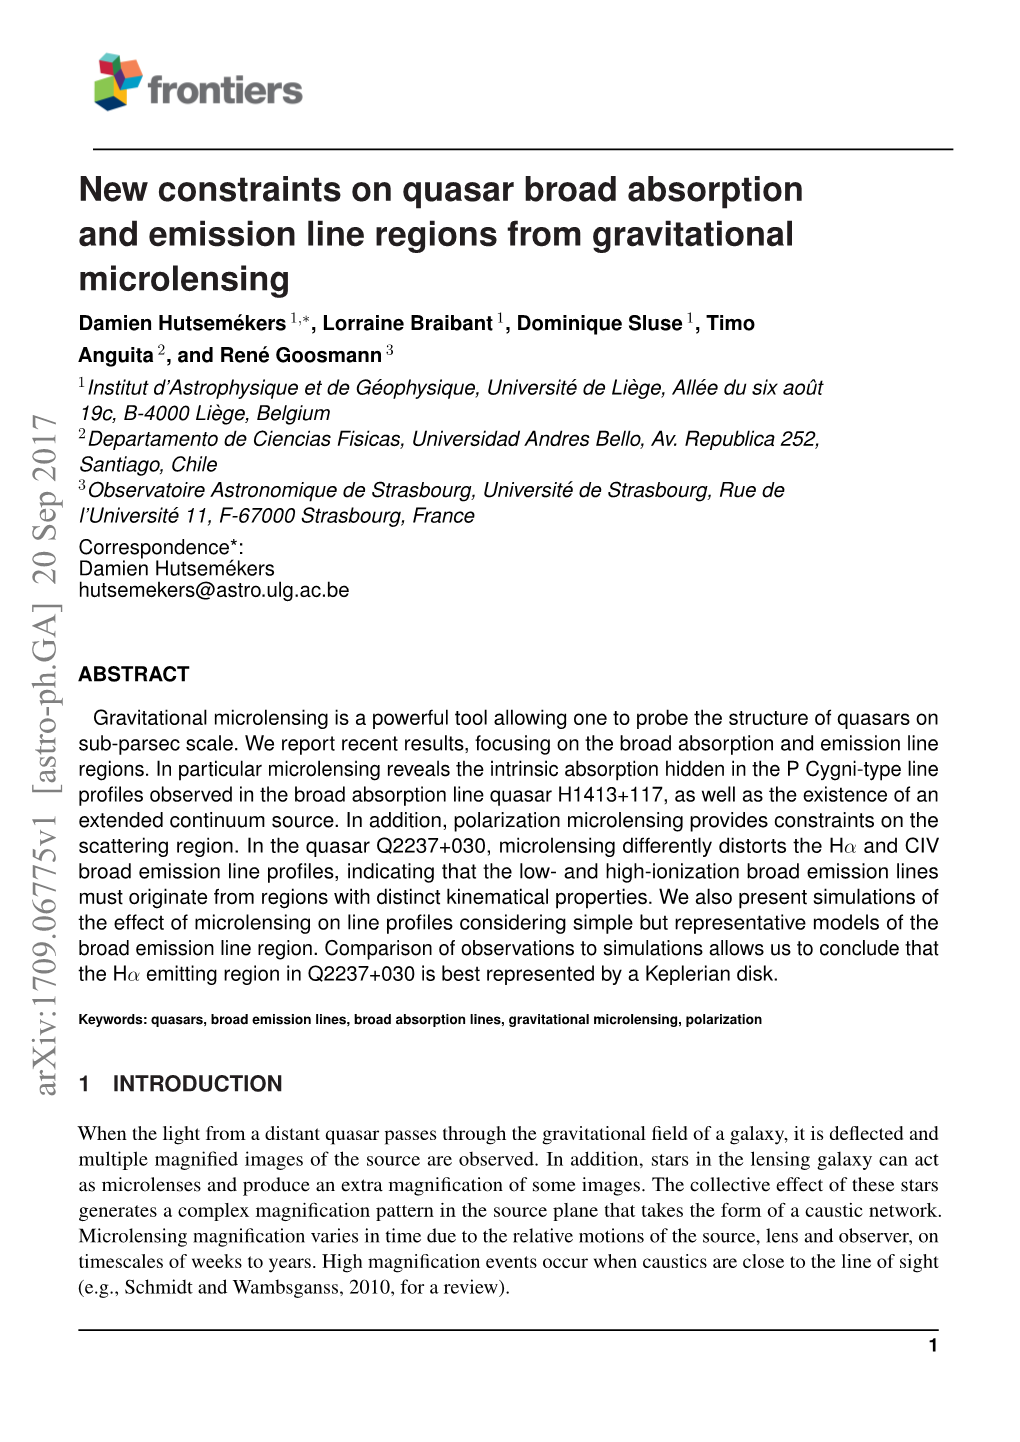 New Constraints on Quasar Broad Absorption and Emission Line Regions from Gravitational Microlensing